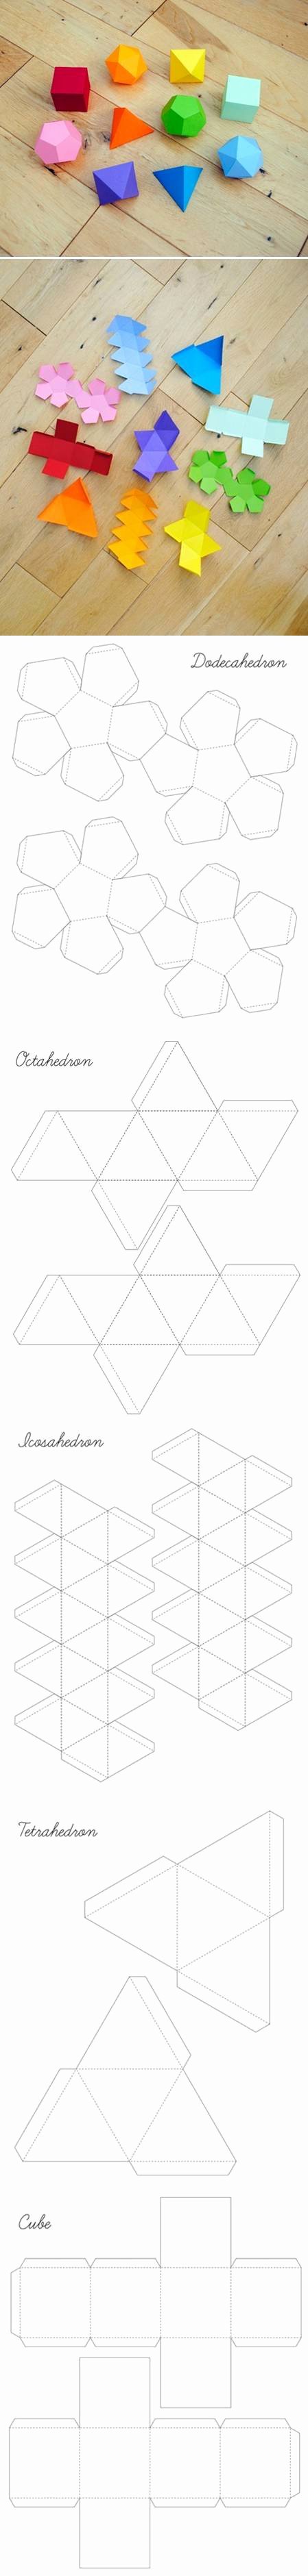 Step by Step Instruction Template New How to Make Geometrical Box Templates Step by Step Diy